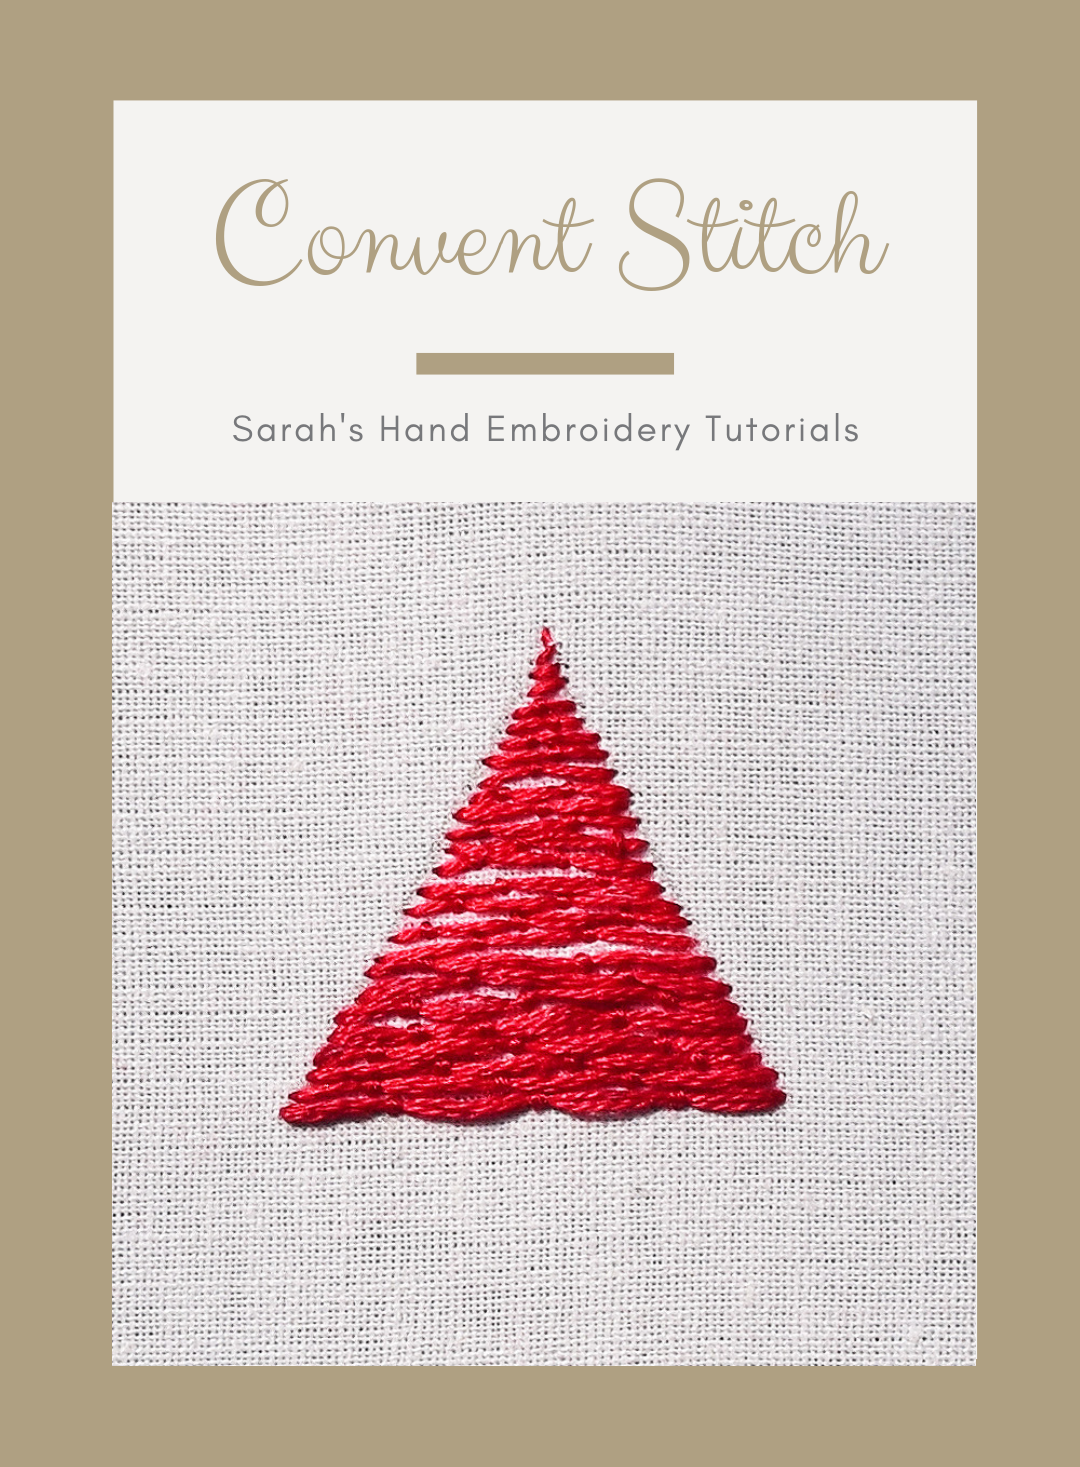 Ladder stitch, invisible stitch, whatever you call her, in my opinion , Invisible Stitch